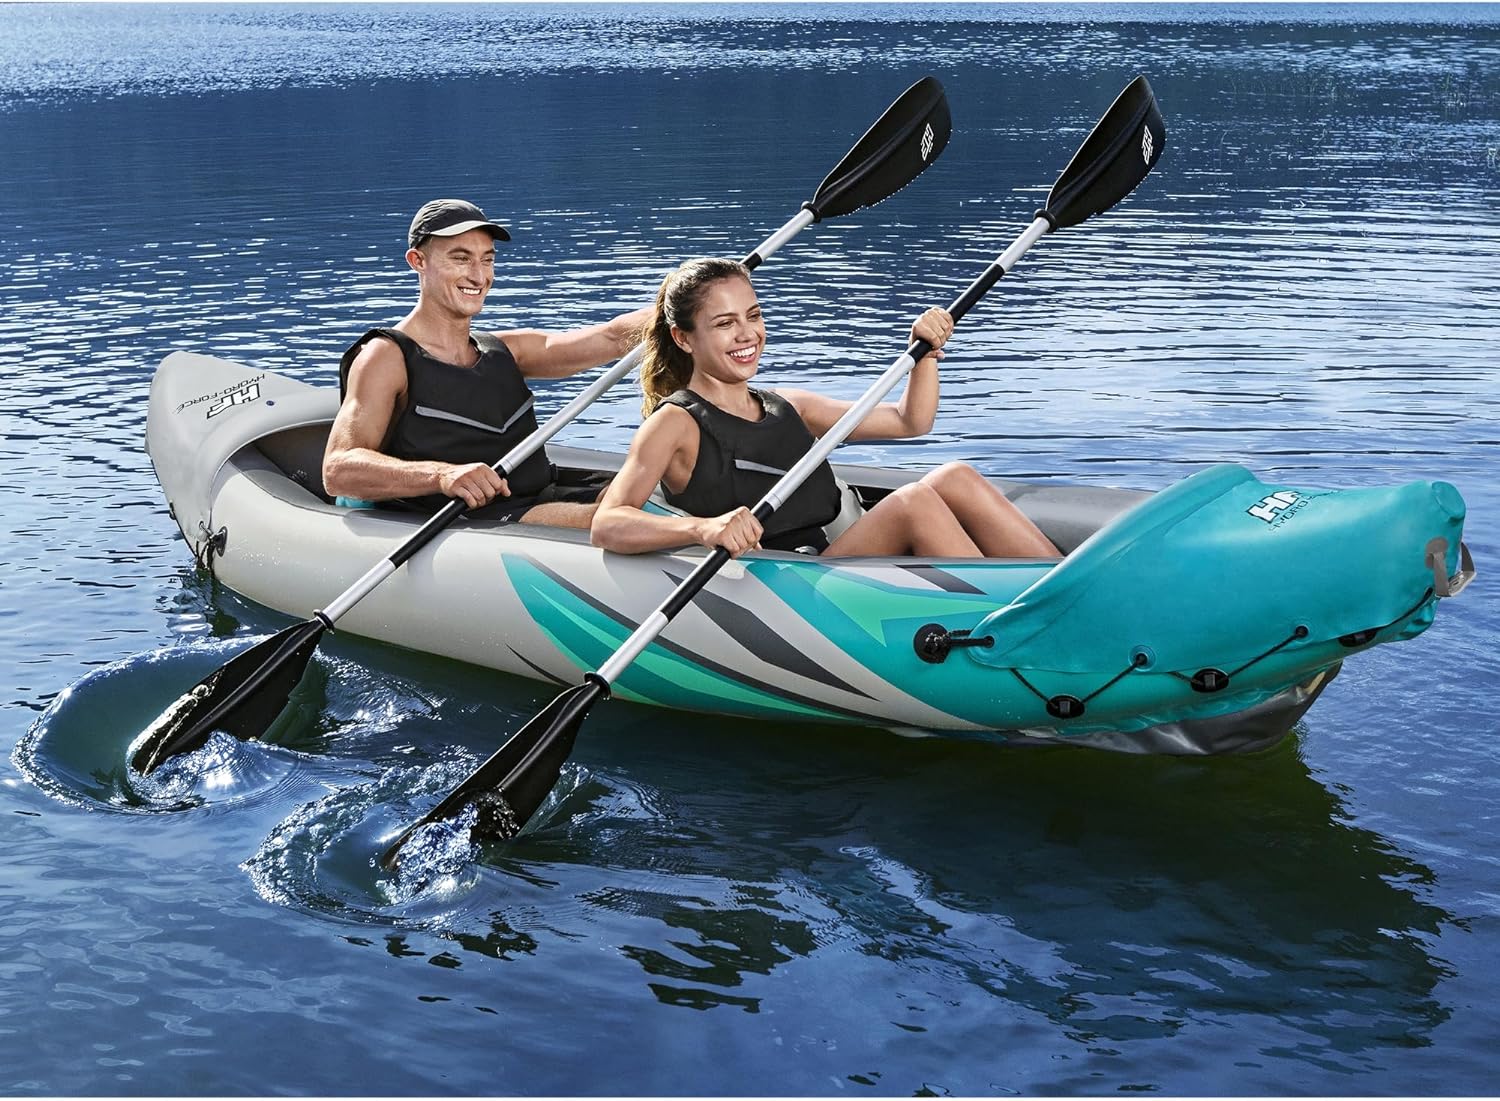 Bestway Hydro Force Inflatable Kayak Set | Includes Seat, Paddle, Hand Pump, Storage Carry Bag | Great for Adults, Kids and Families - Bestway Hydro Force Inflatable Kayak Set Review